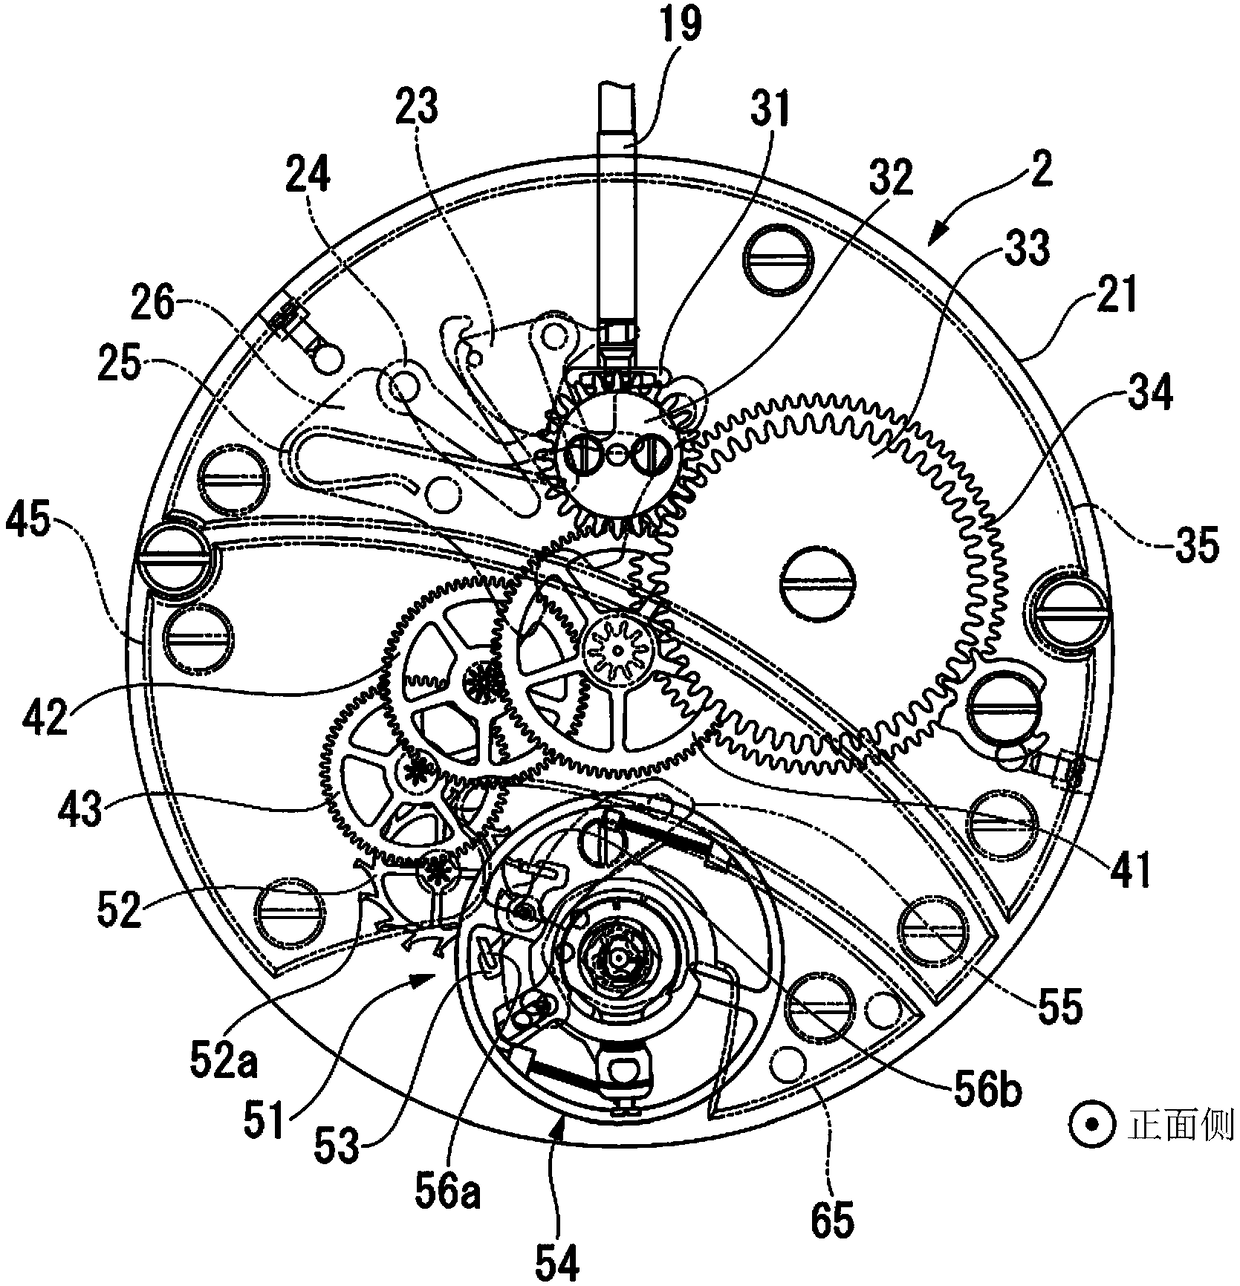 Temperature-compensate-type hair-spring balance wheel, movement, and timepiece